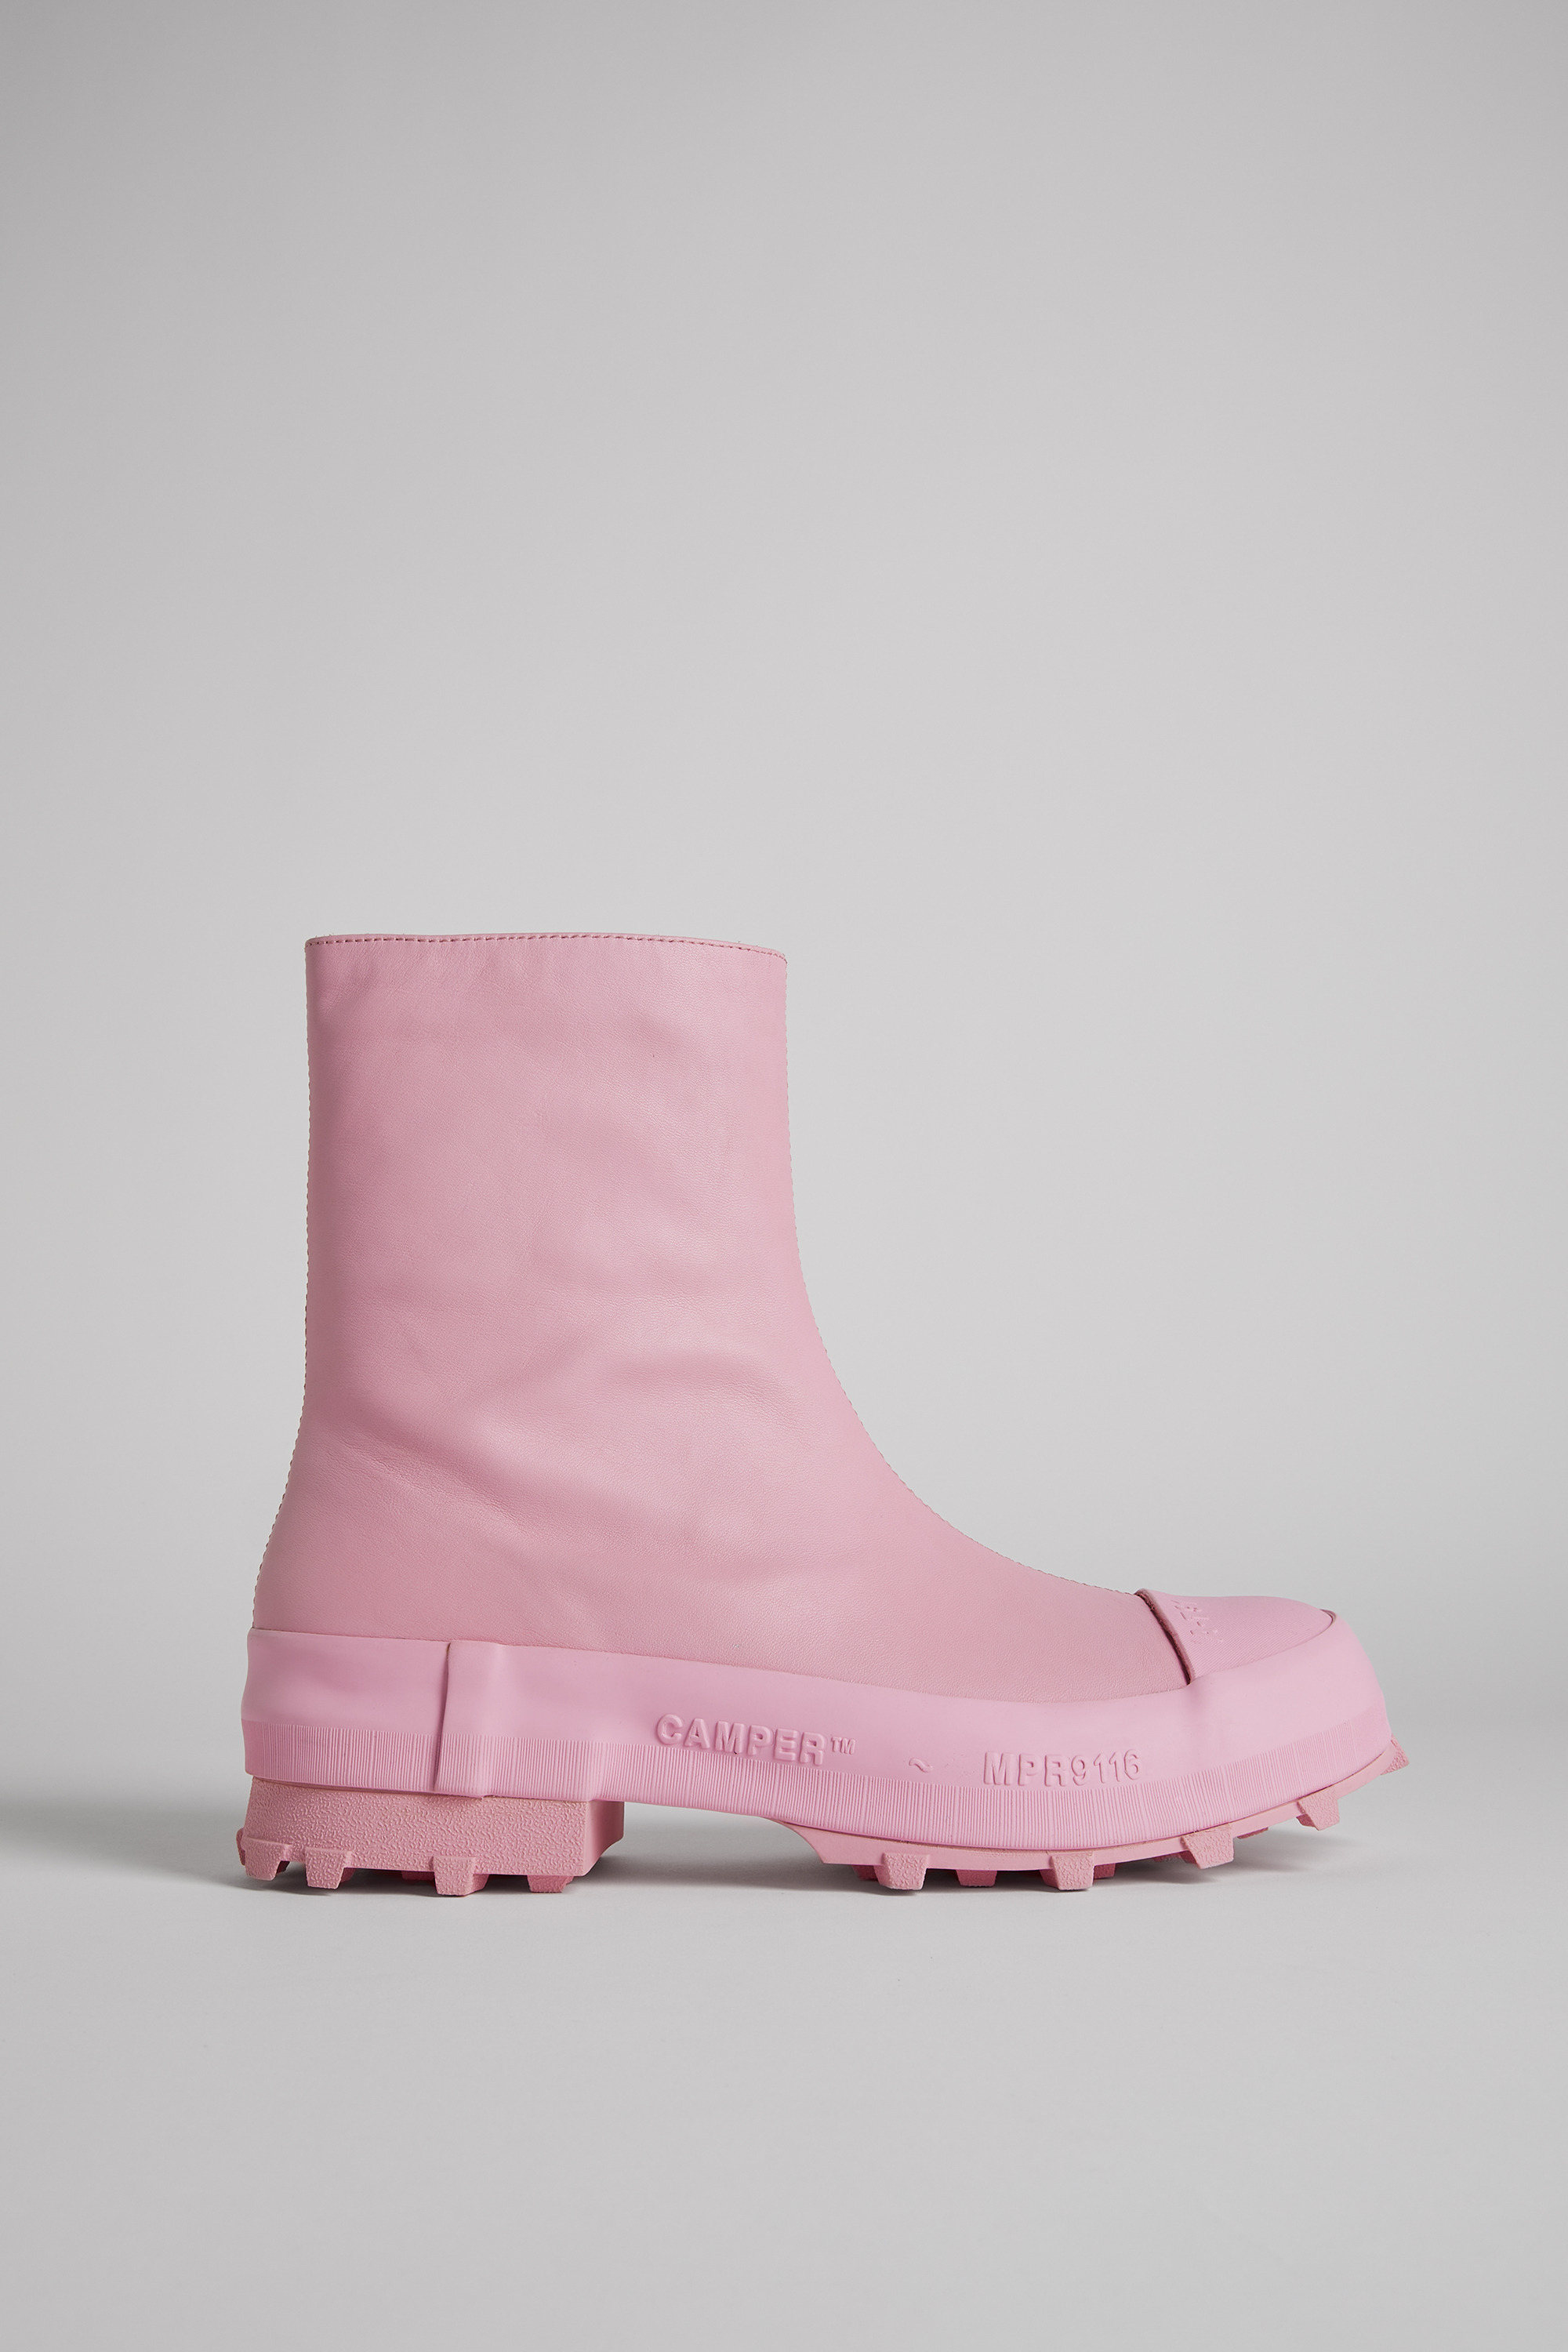 USA - Men TKR Camper - Pink for Ankle Fall/Winter Boots collection